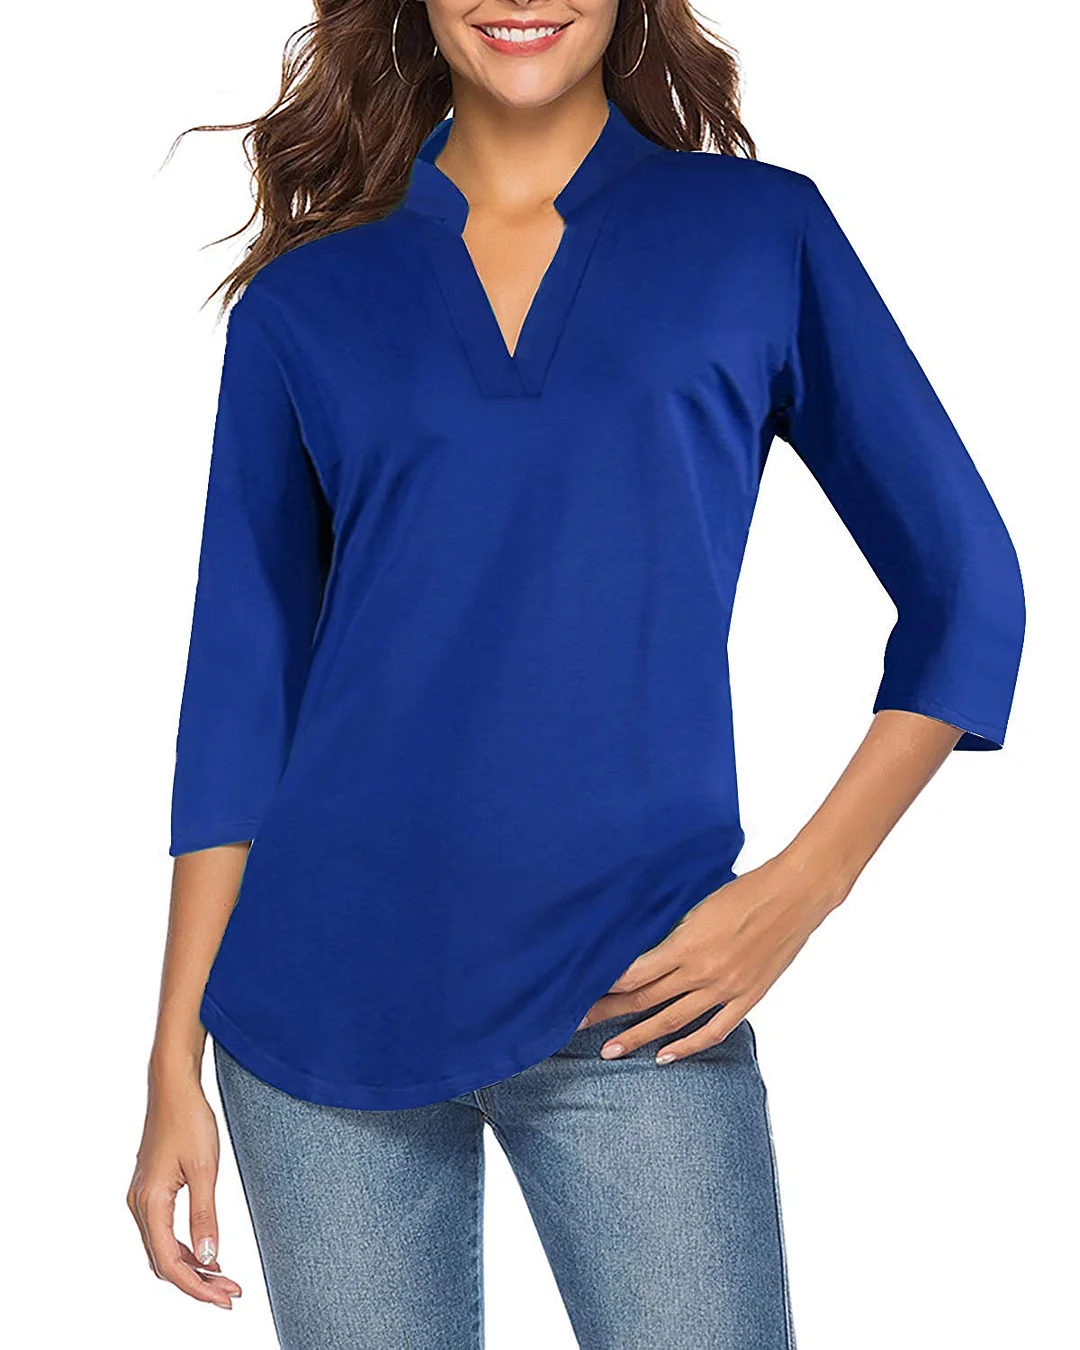 Women's 3/4 Sleeve V Neck Tops Casual Tunic Blouse Loose Shirt